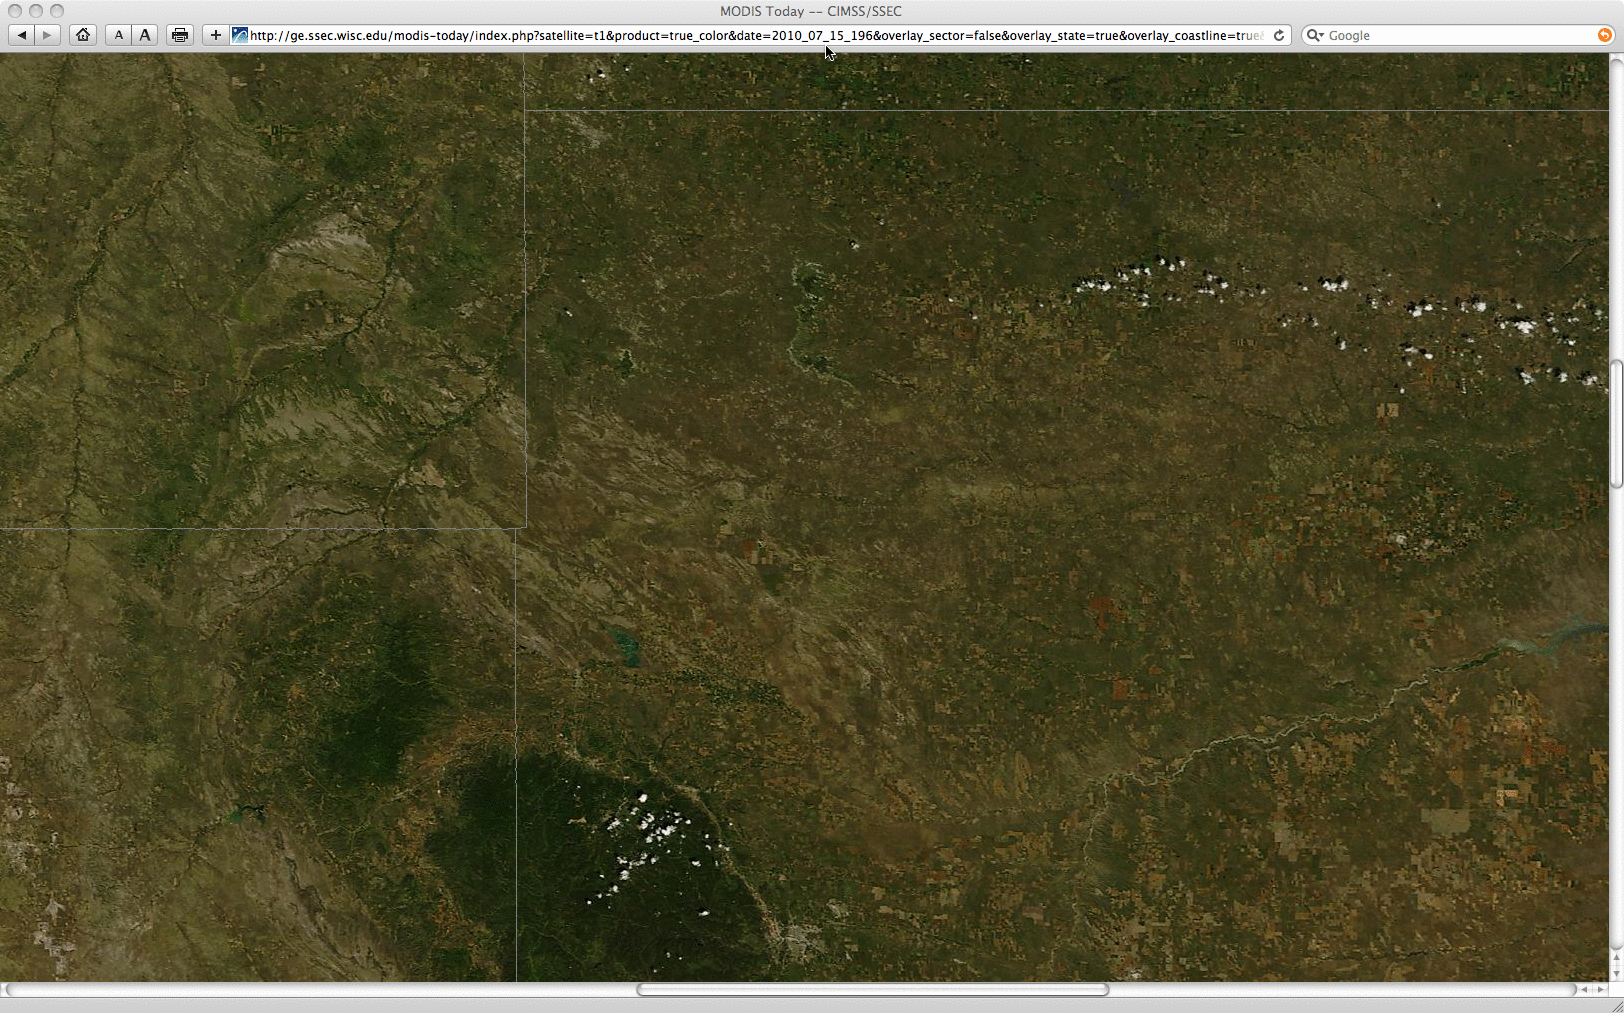 MODIS true color RGB images from 15 July, 20 July, and 25 July 2010